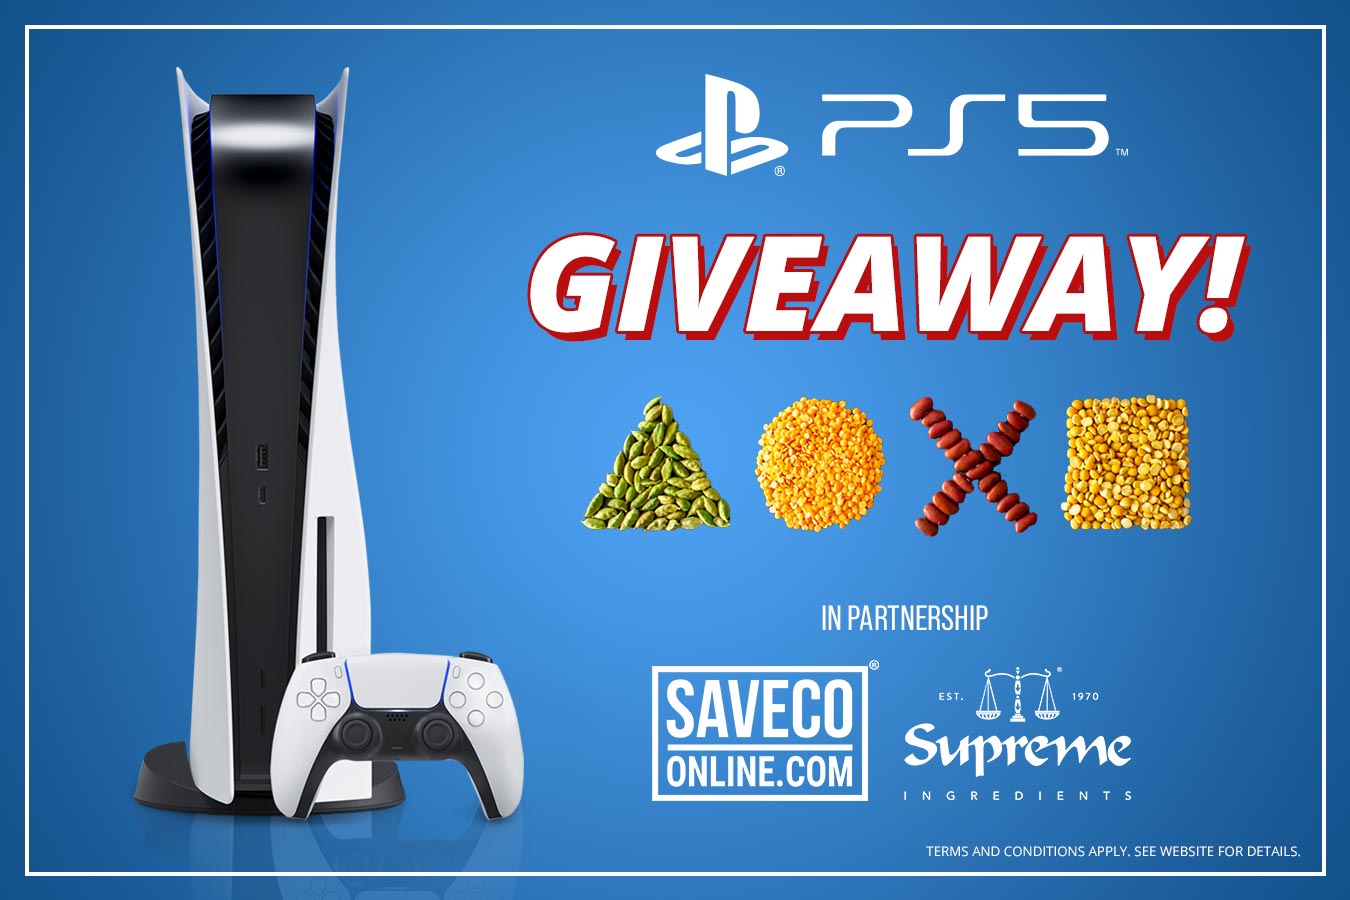 PS5 Giveaway - ENTER NOW!